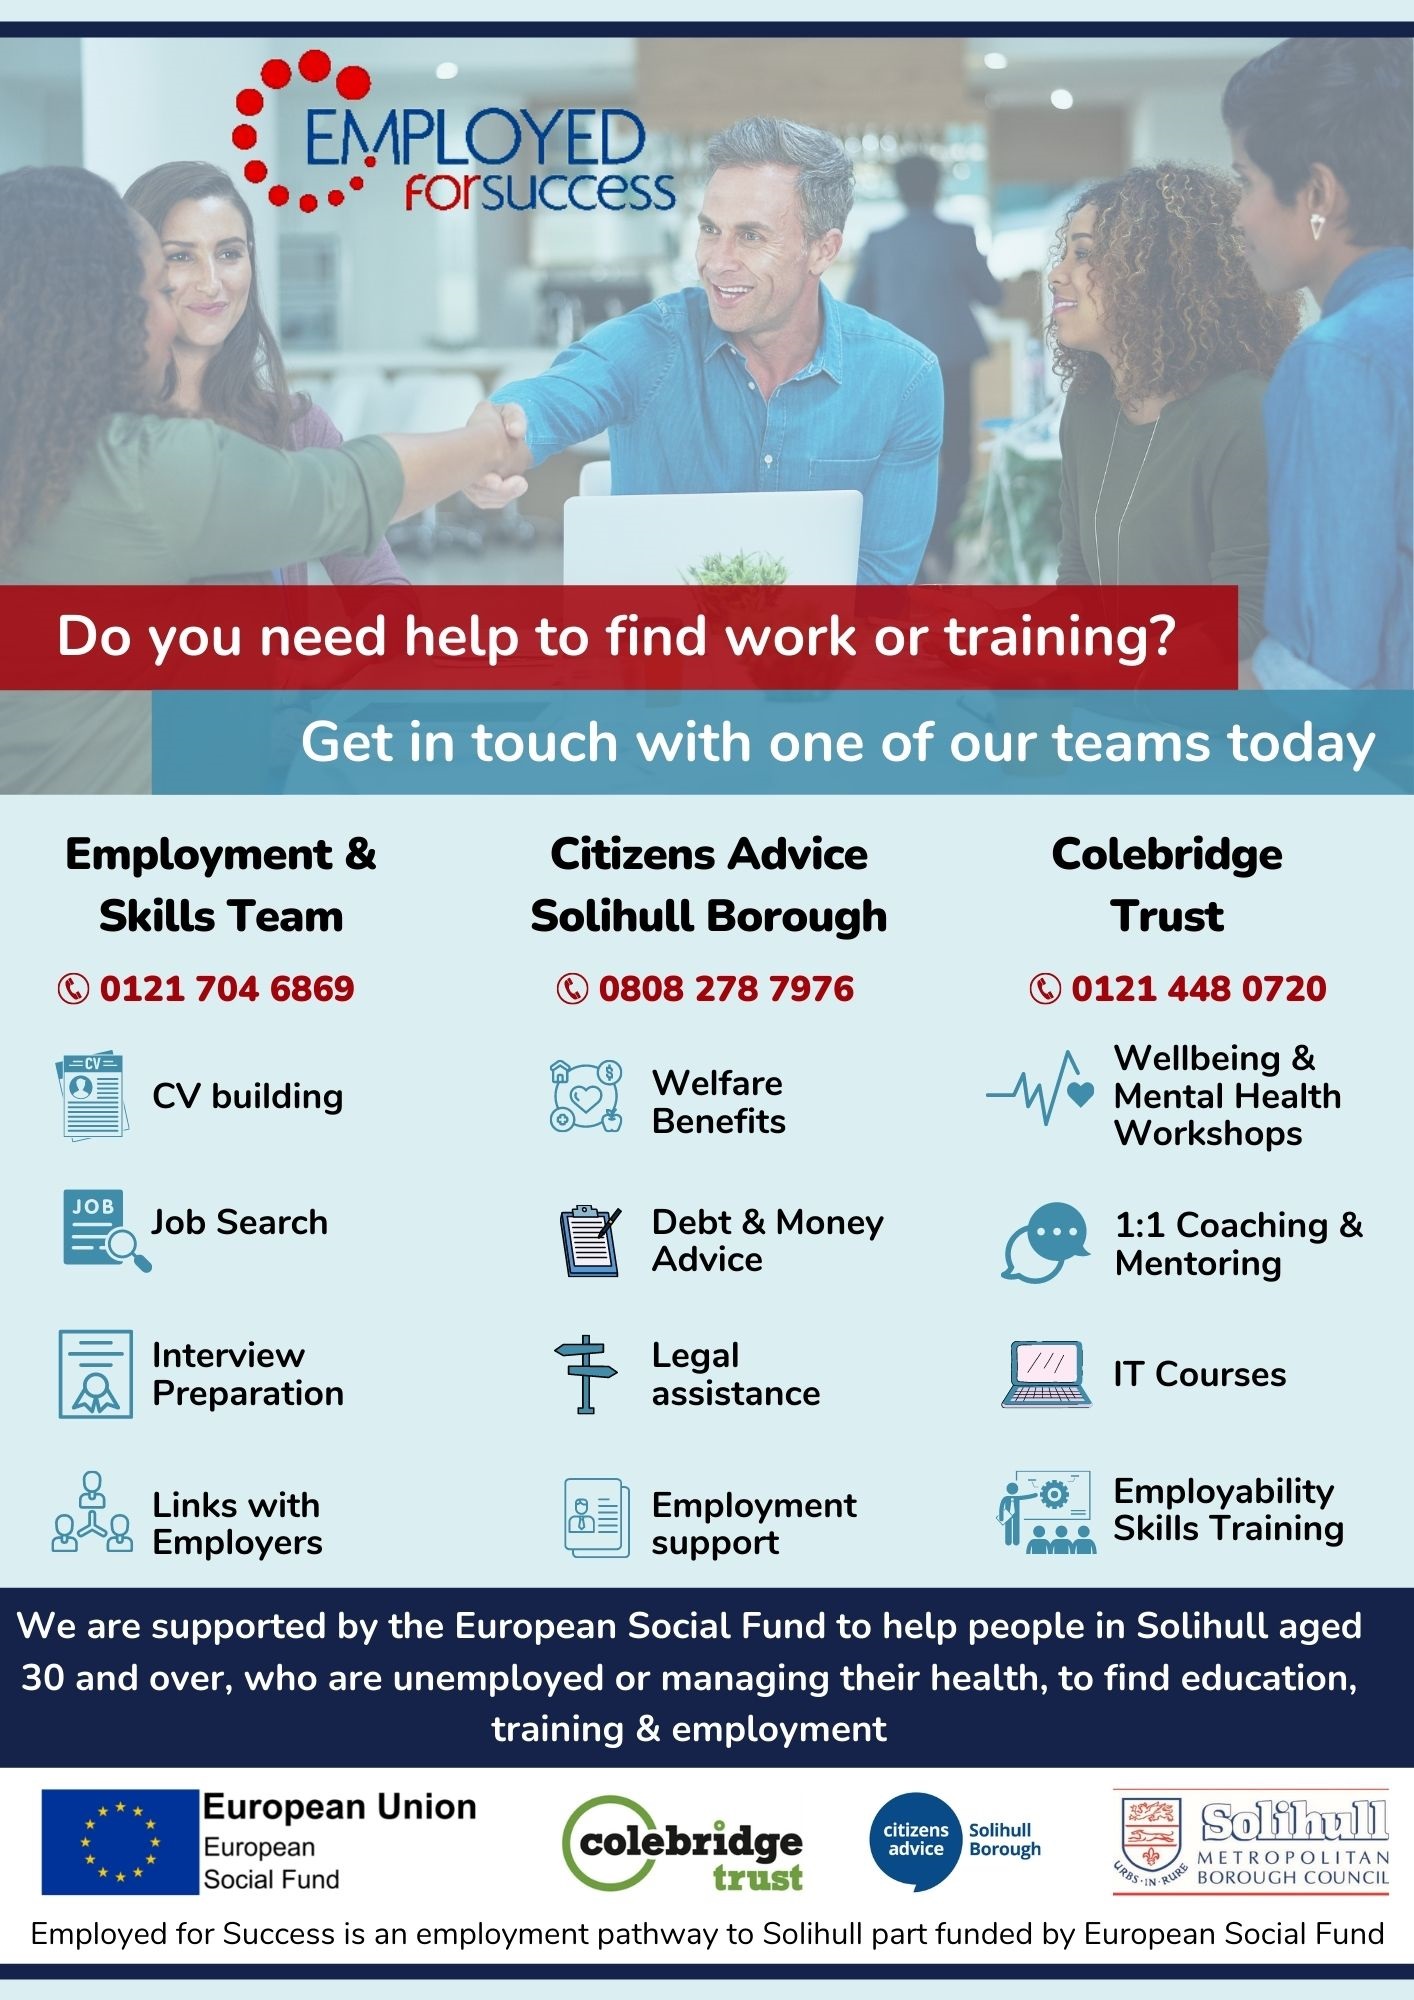 Employed for Success - Help to find work